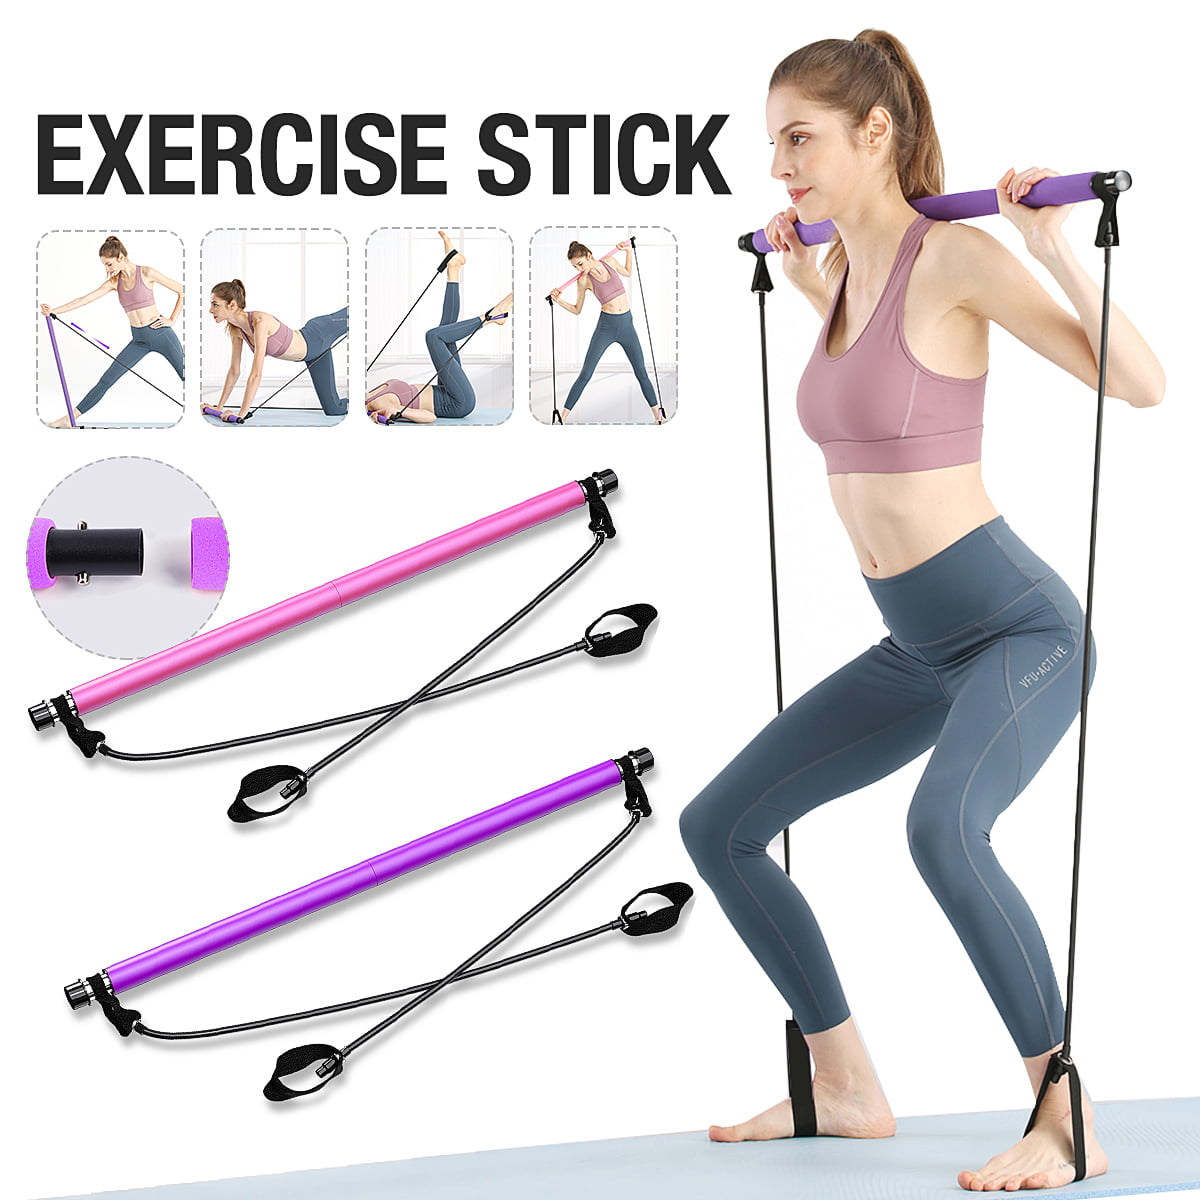 Resistance Band Loop Yoga Pilates Home GYM Fitness Exercise Workout Training 1X 